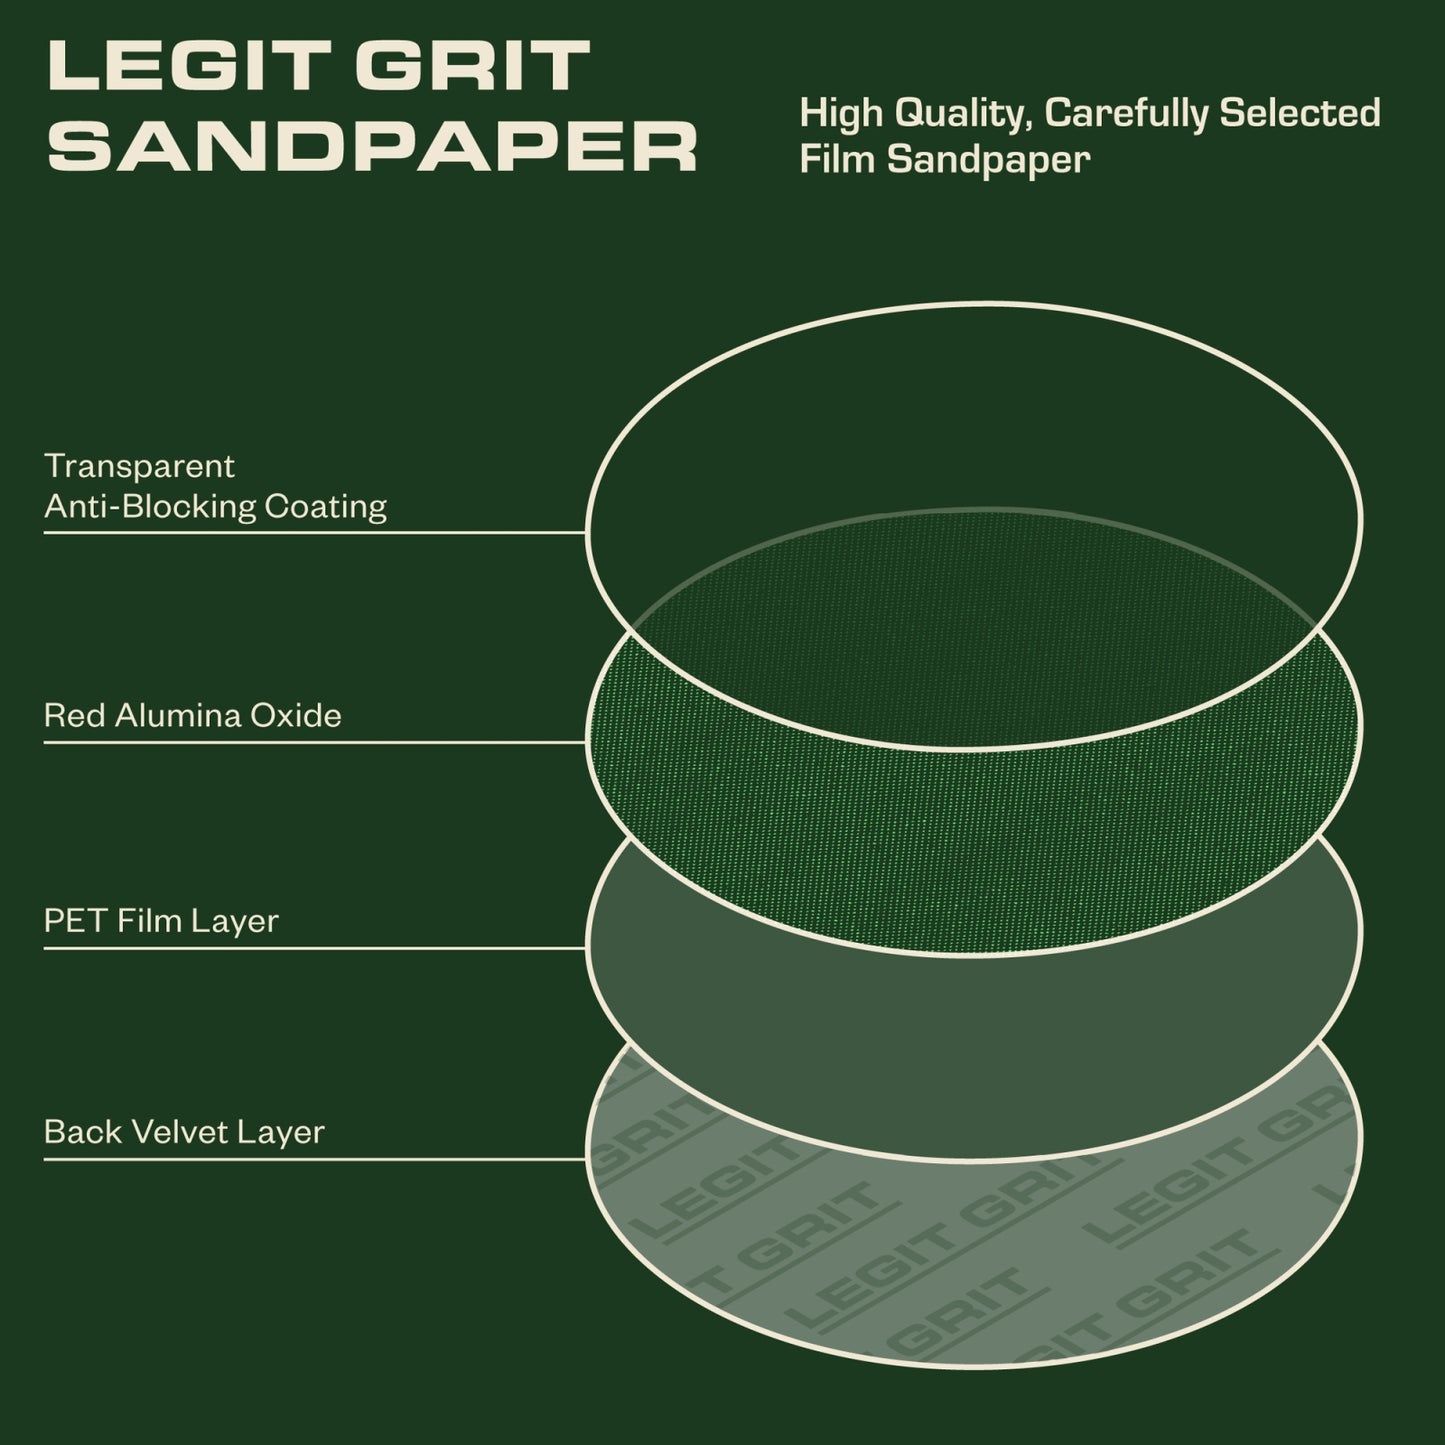 Legit Grit 6 inch Sand paper Disc, 6-Hole, Mixed Grit Sample Pack, GRITS: 80/120/150/180/220 (2 of each) 10 Pack